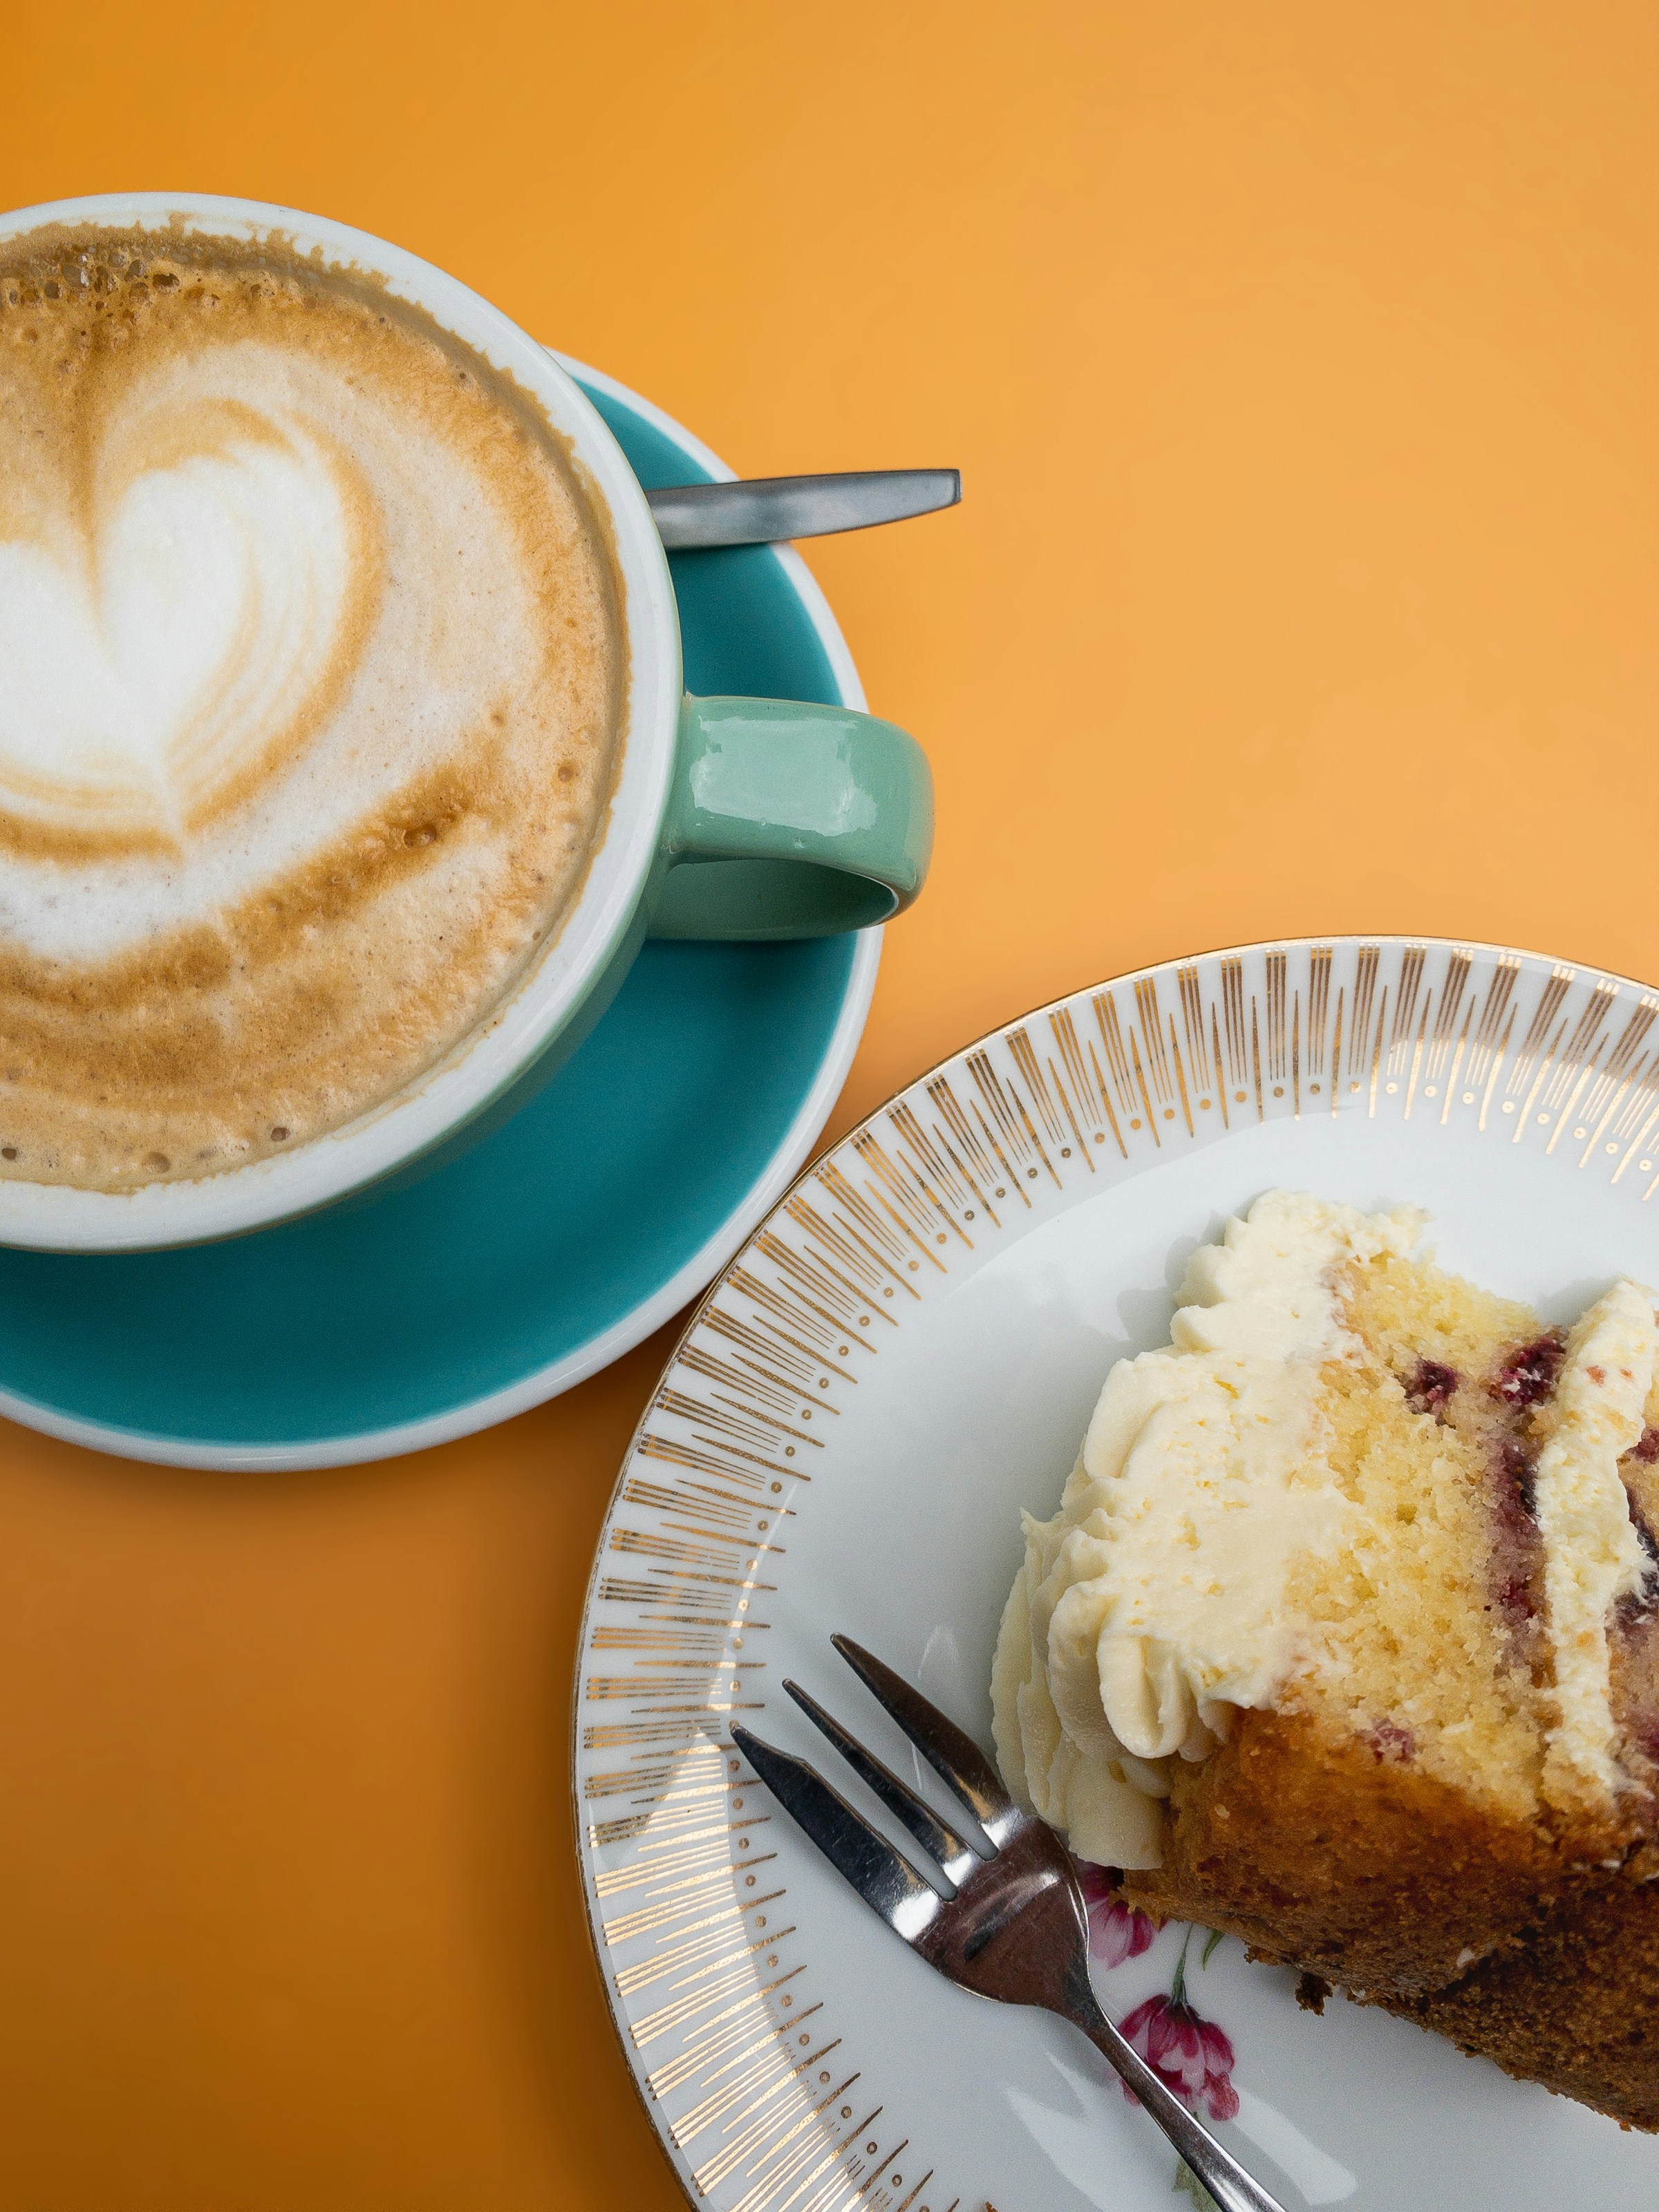 A cup of coffee and a slice of cake | Source: Unsplash